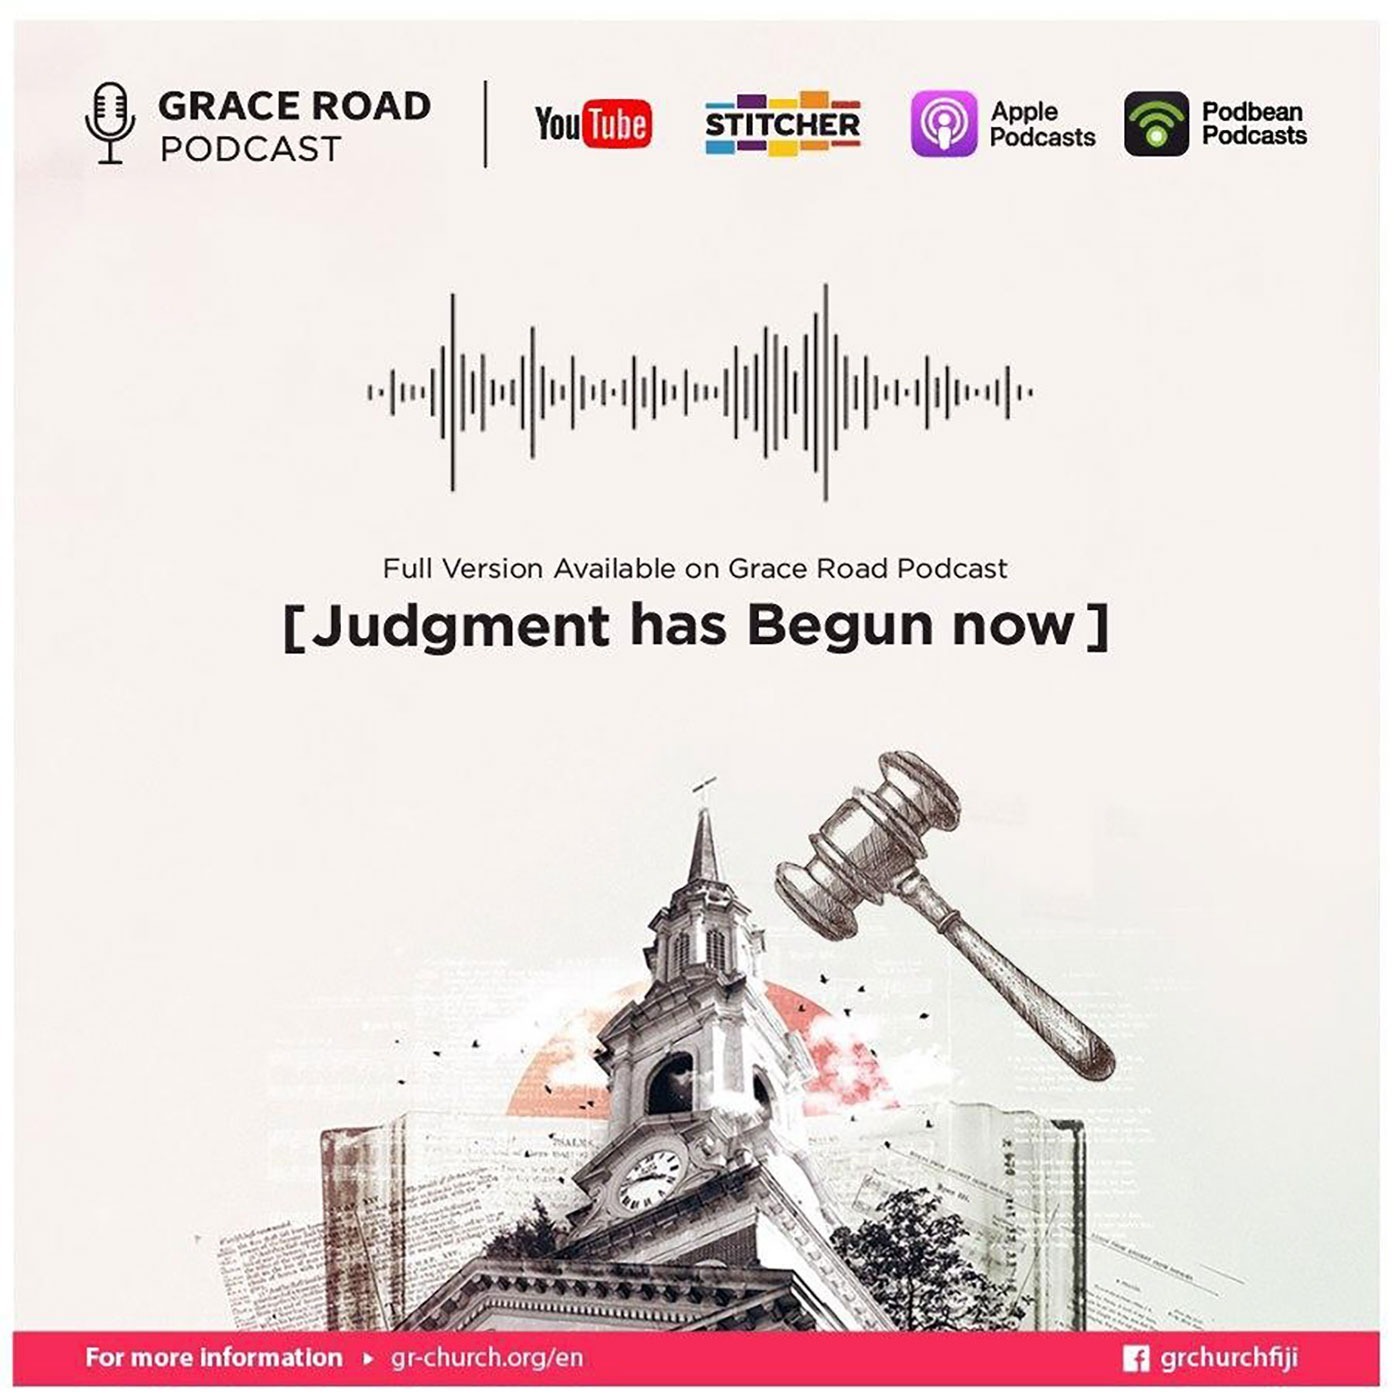 Grace Road Podcast